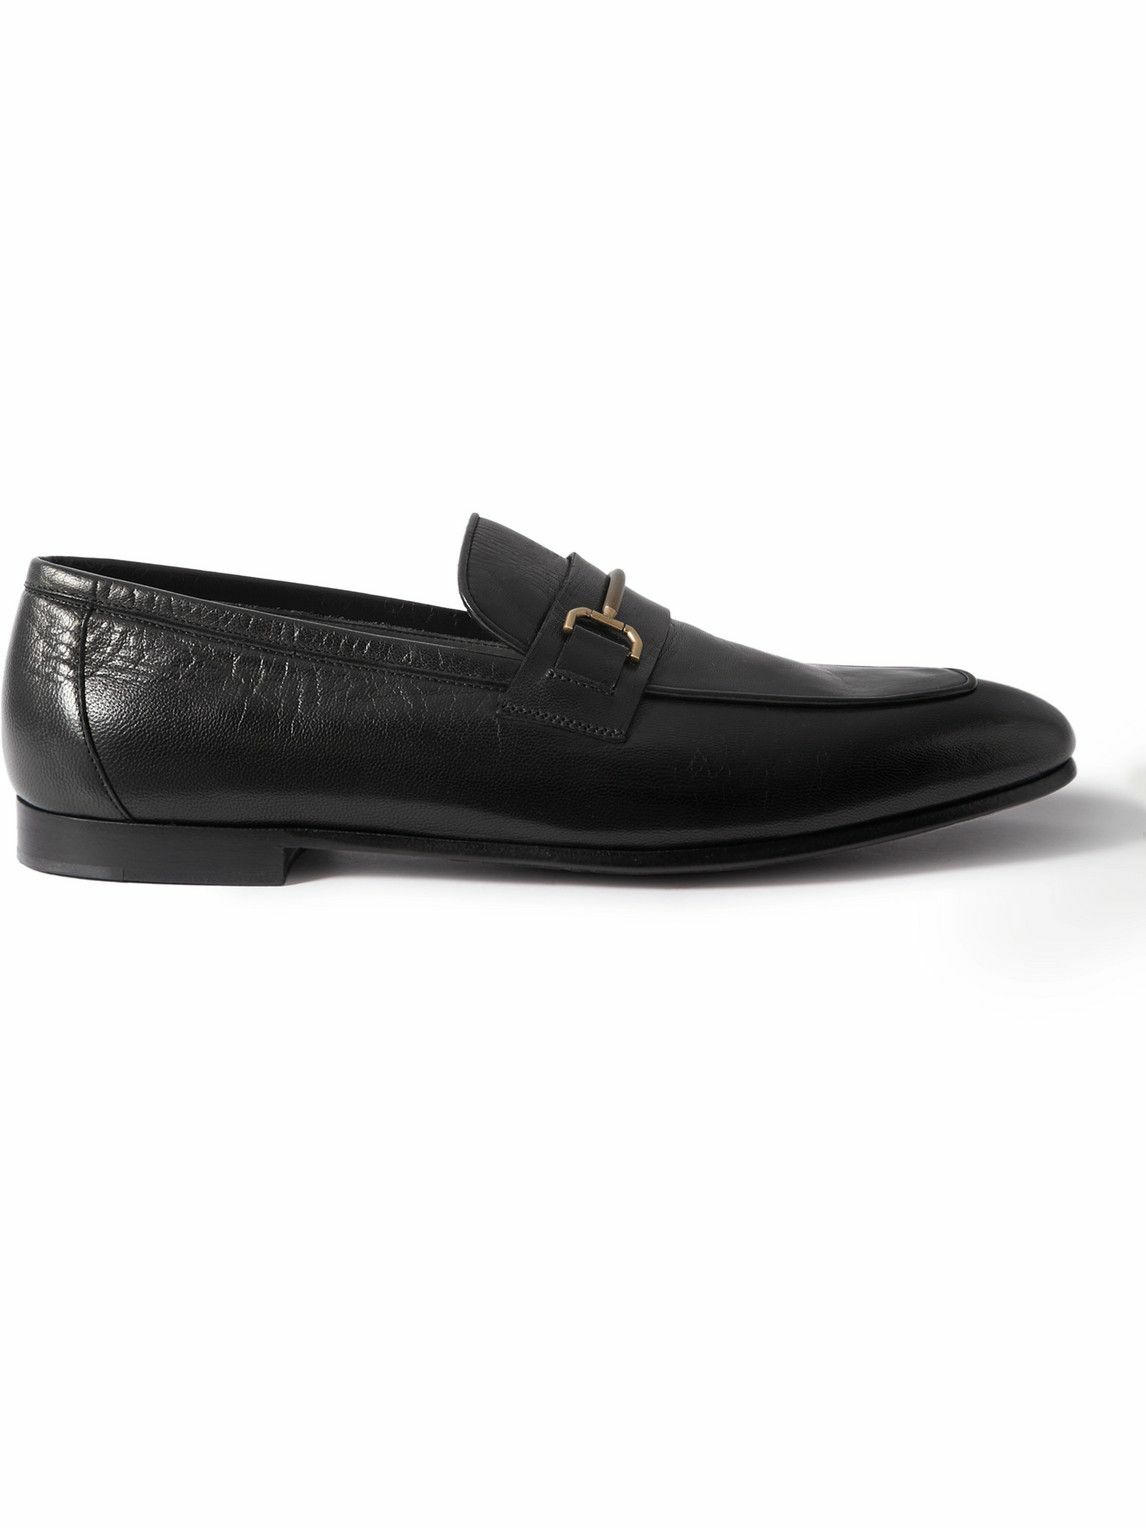 Dunhill - Chiltern Leather Loafers - Black Dunhill